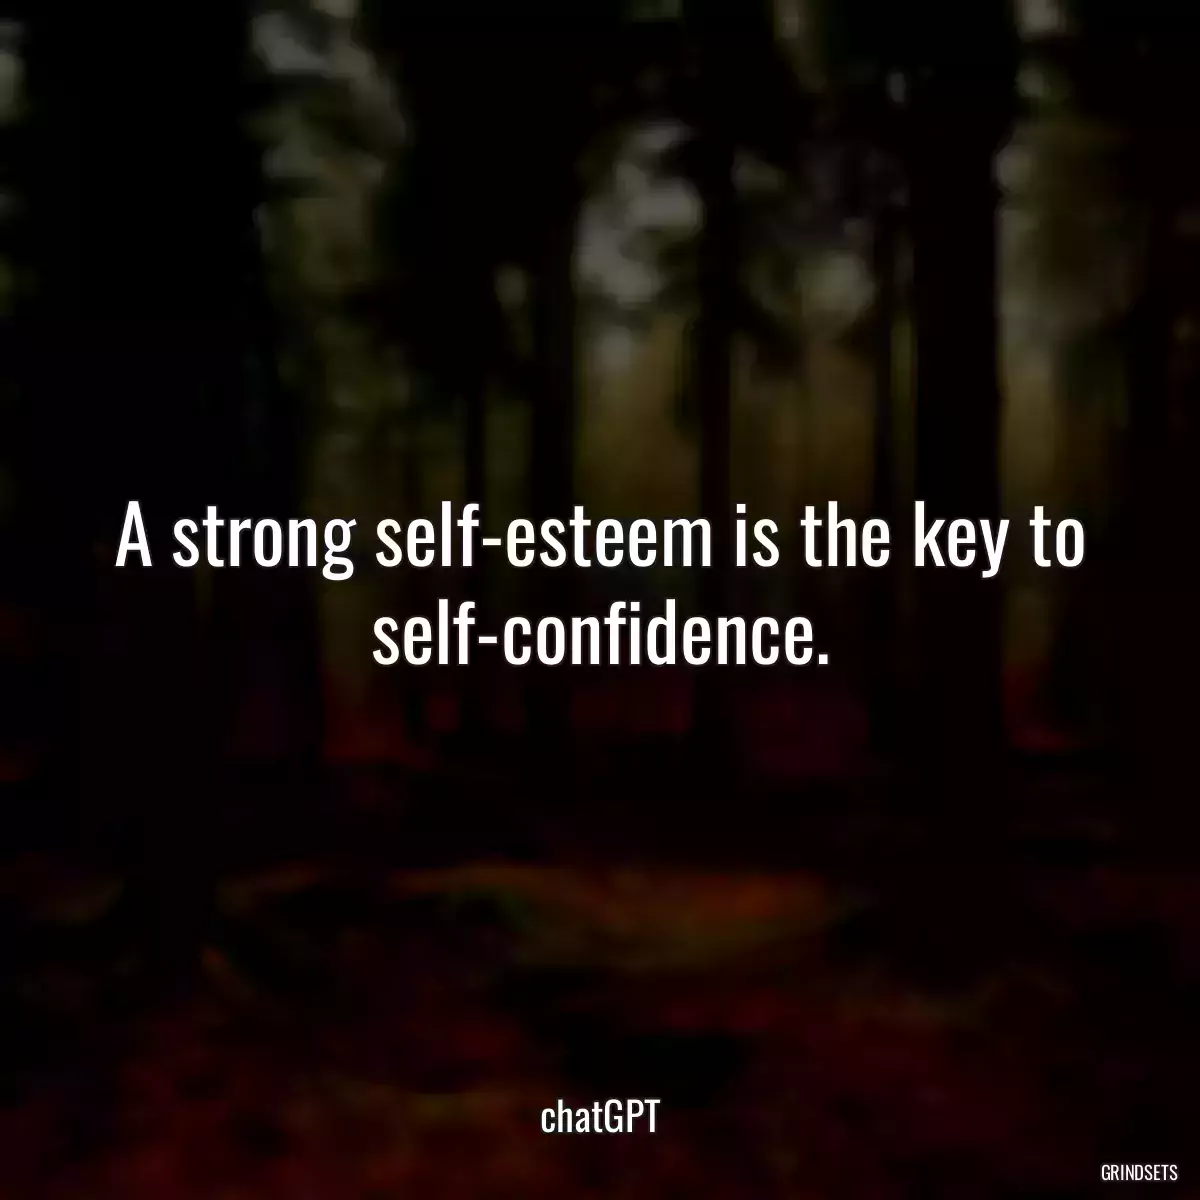 A strong self-esteem is the key to self-confidence.